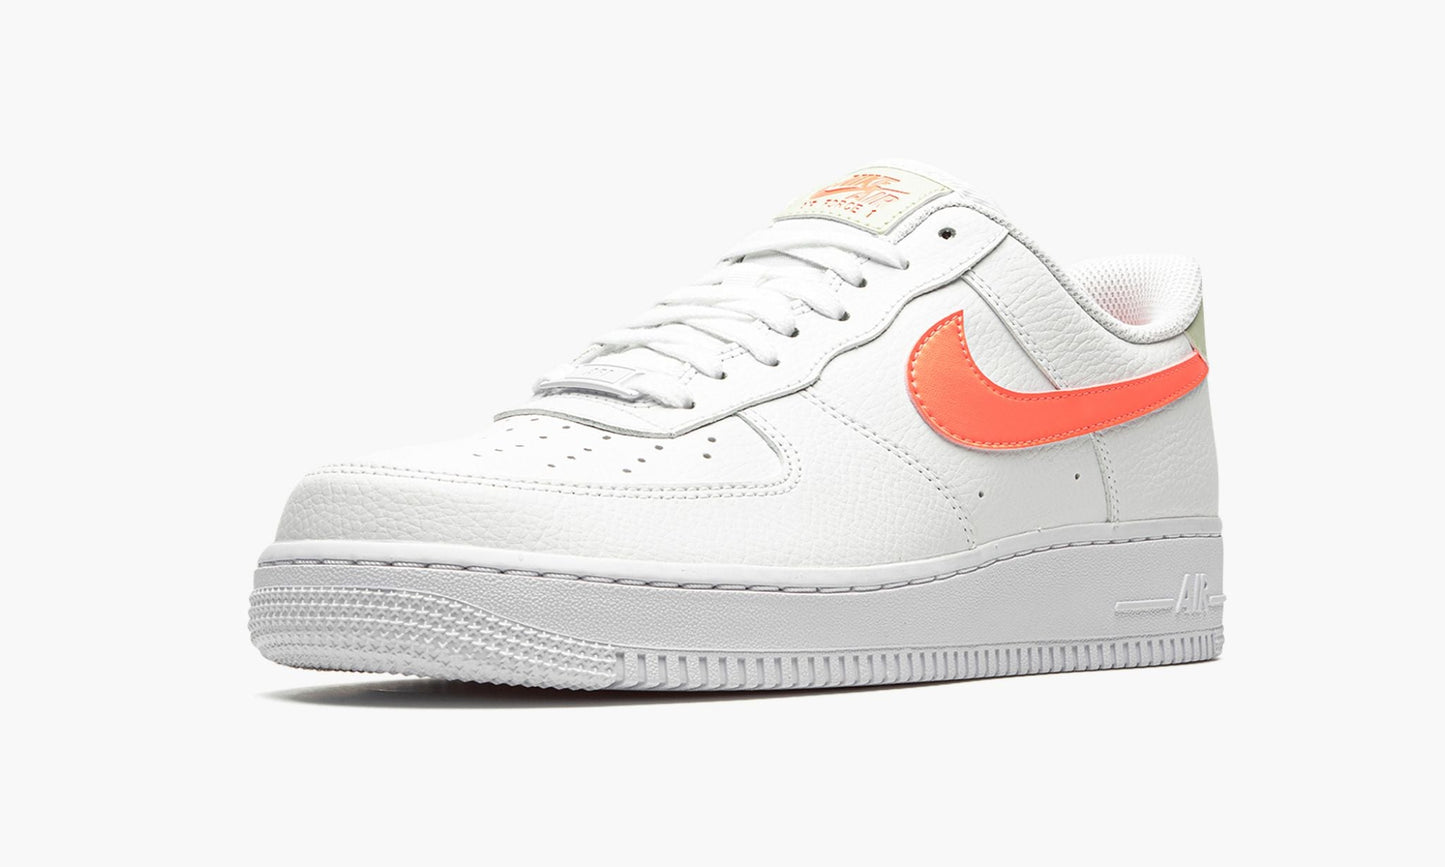 WMNS AIR FORCE 1 07 "ATOMIC PINK"